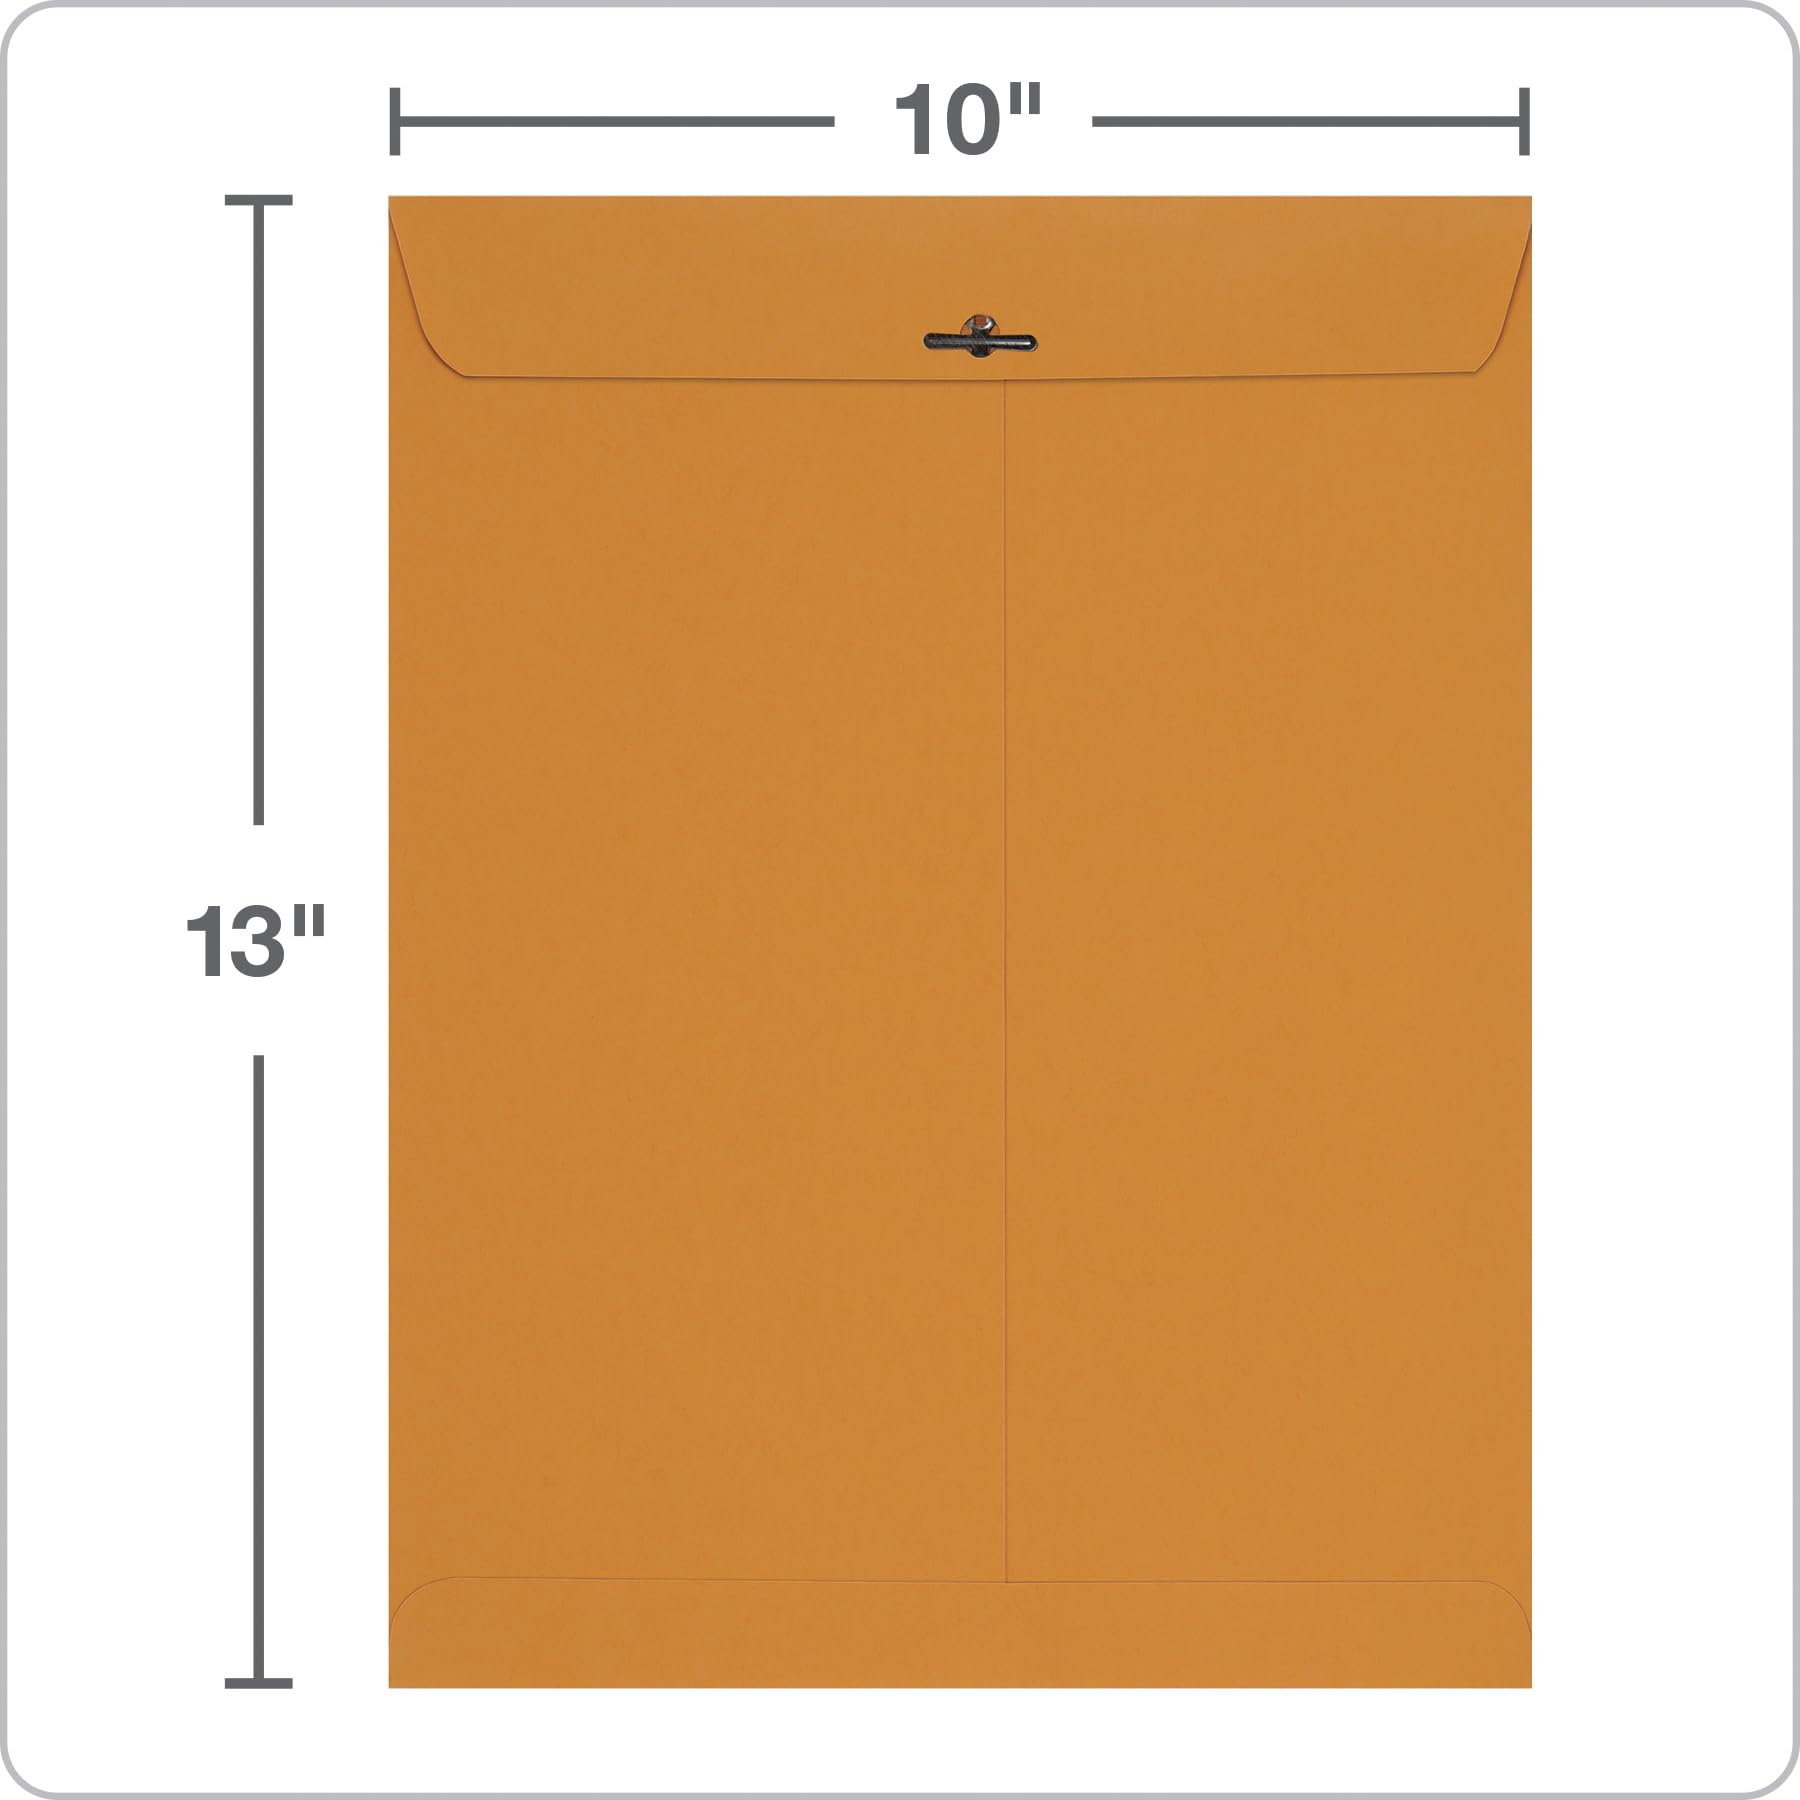 Columbian 10 x 13 Clasp Envelopes, Self Seal, 28 lb Brown Kraft, for Mailing Flat Letter Size Documents or Photos, Bulk Pack, 30 Per Pack (COLO405)